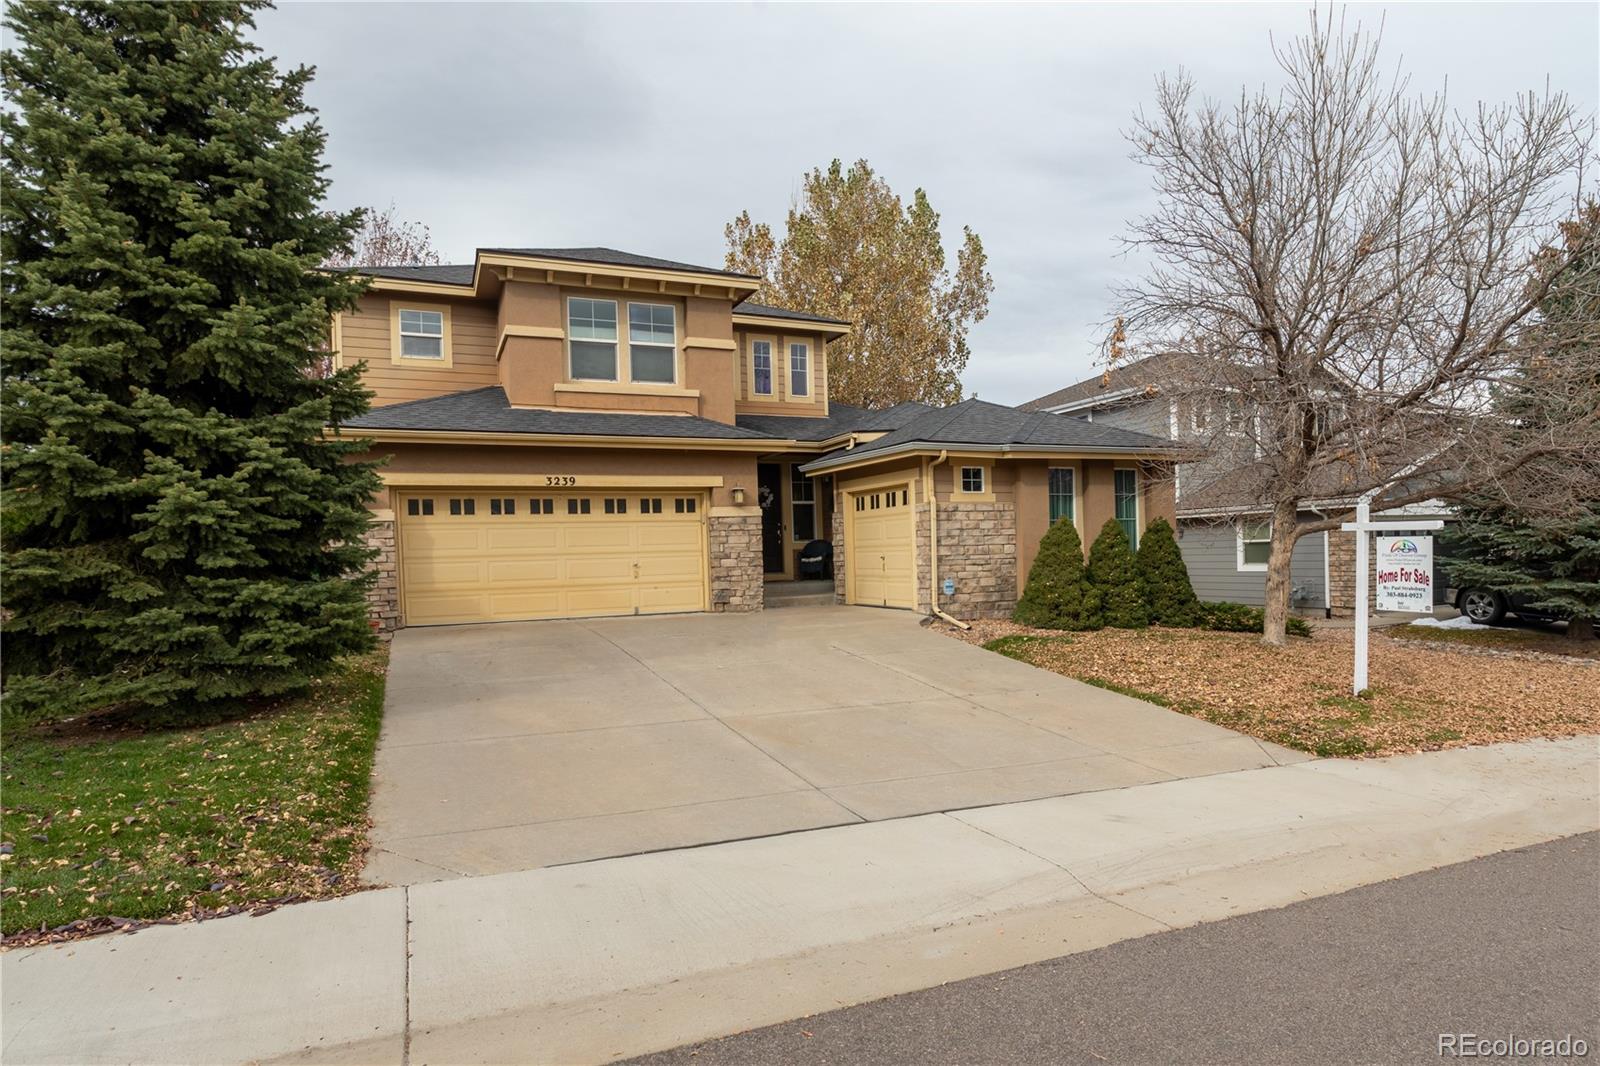 3239  chandon court, Highlands Ranch sold home. Closed on 2024-02-08 for $725,000.